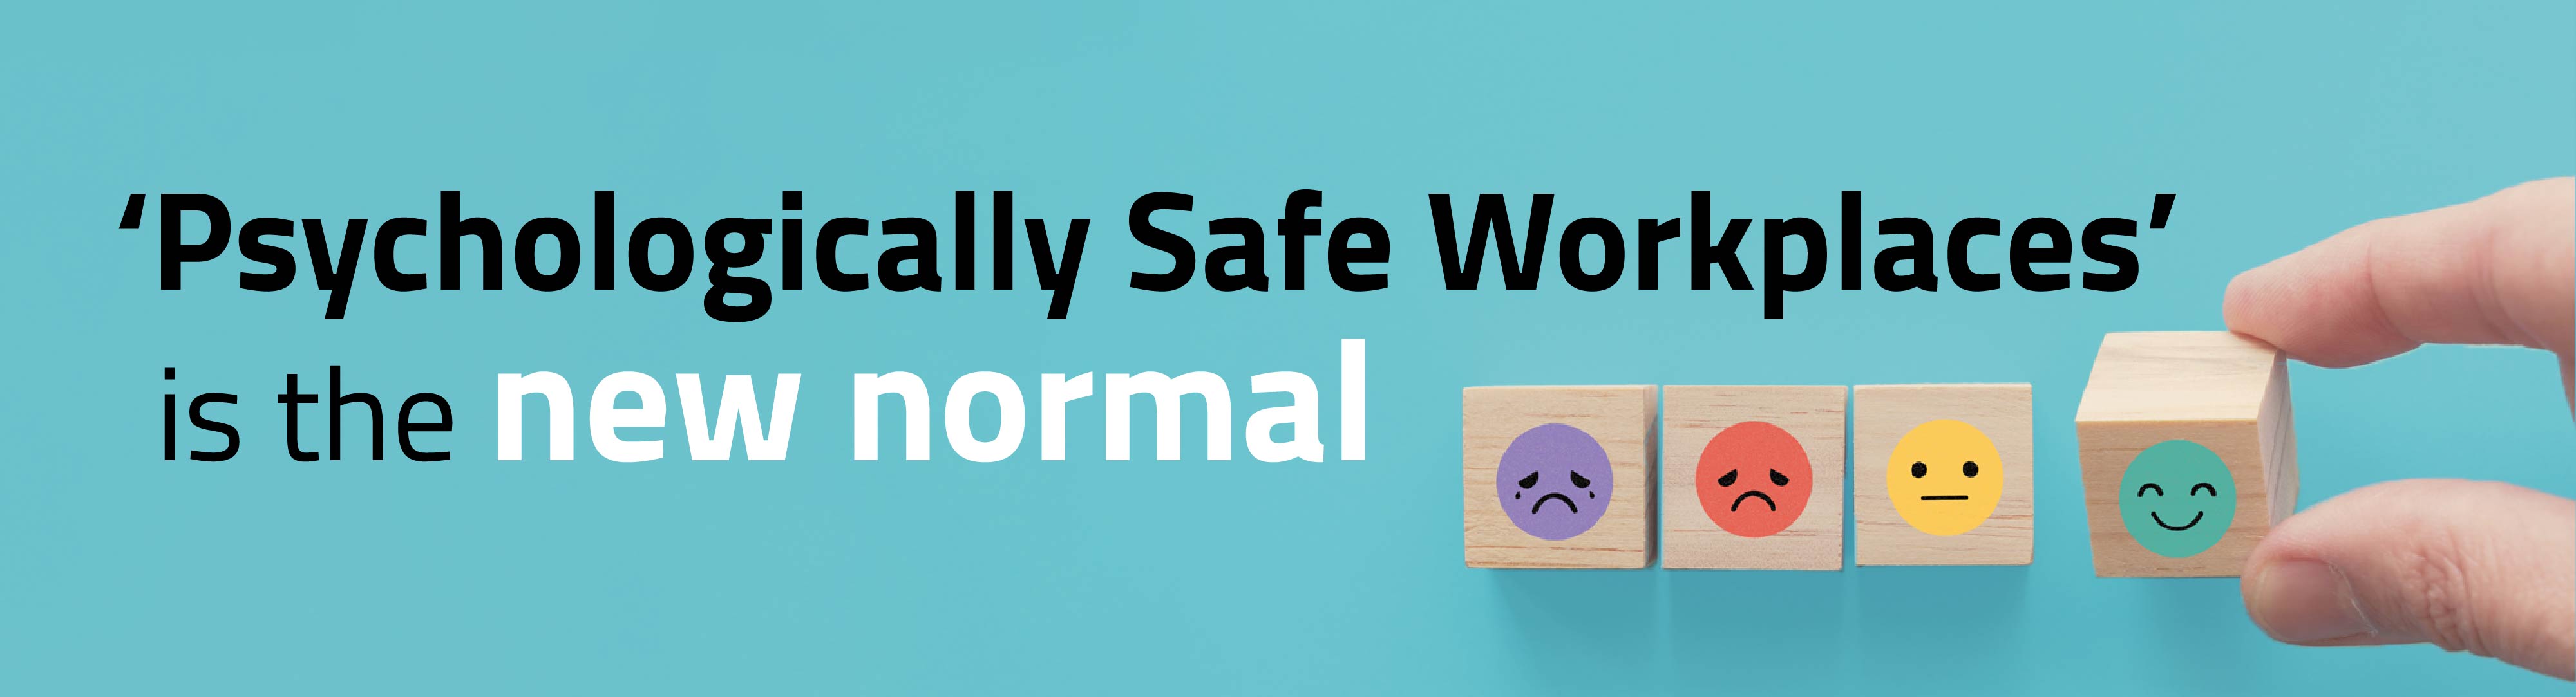 Psychologically safe workspaces is the new normal